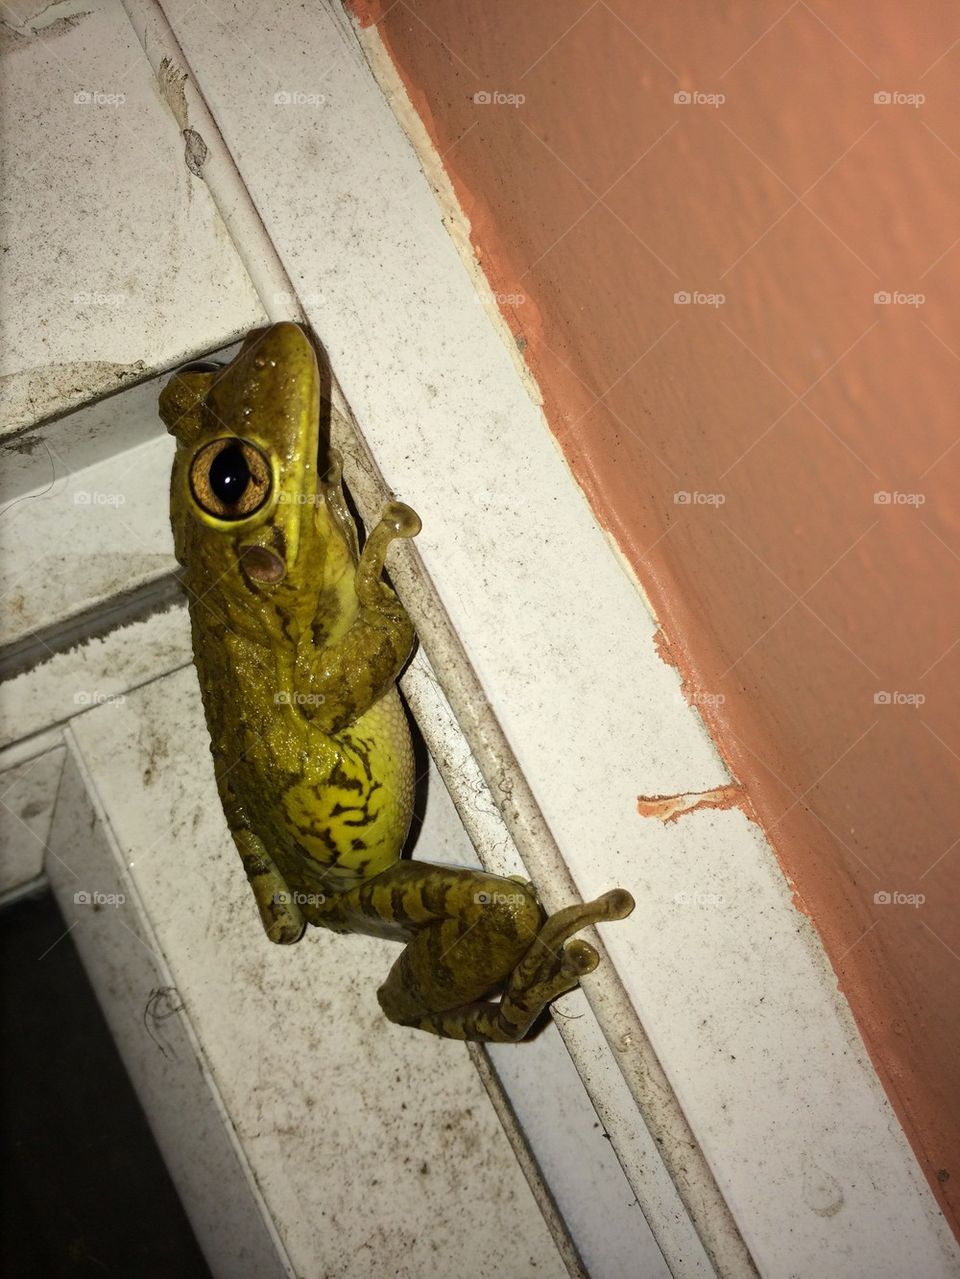 Another Frog